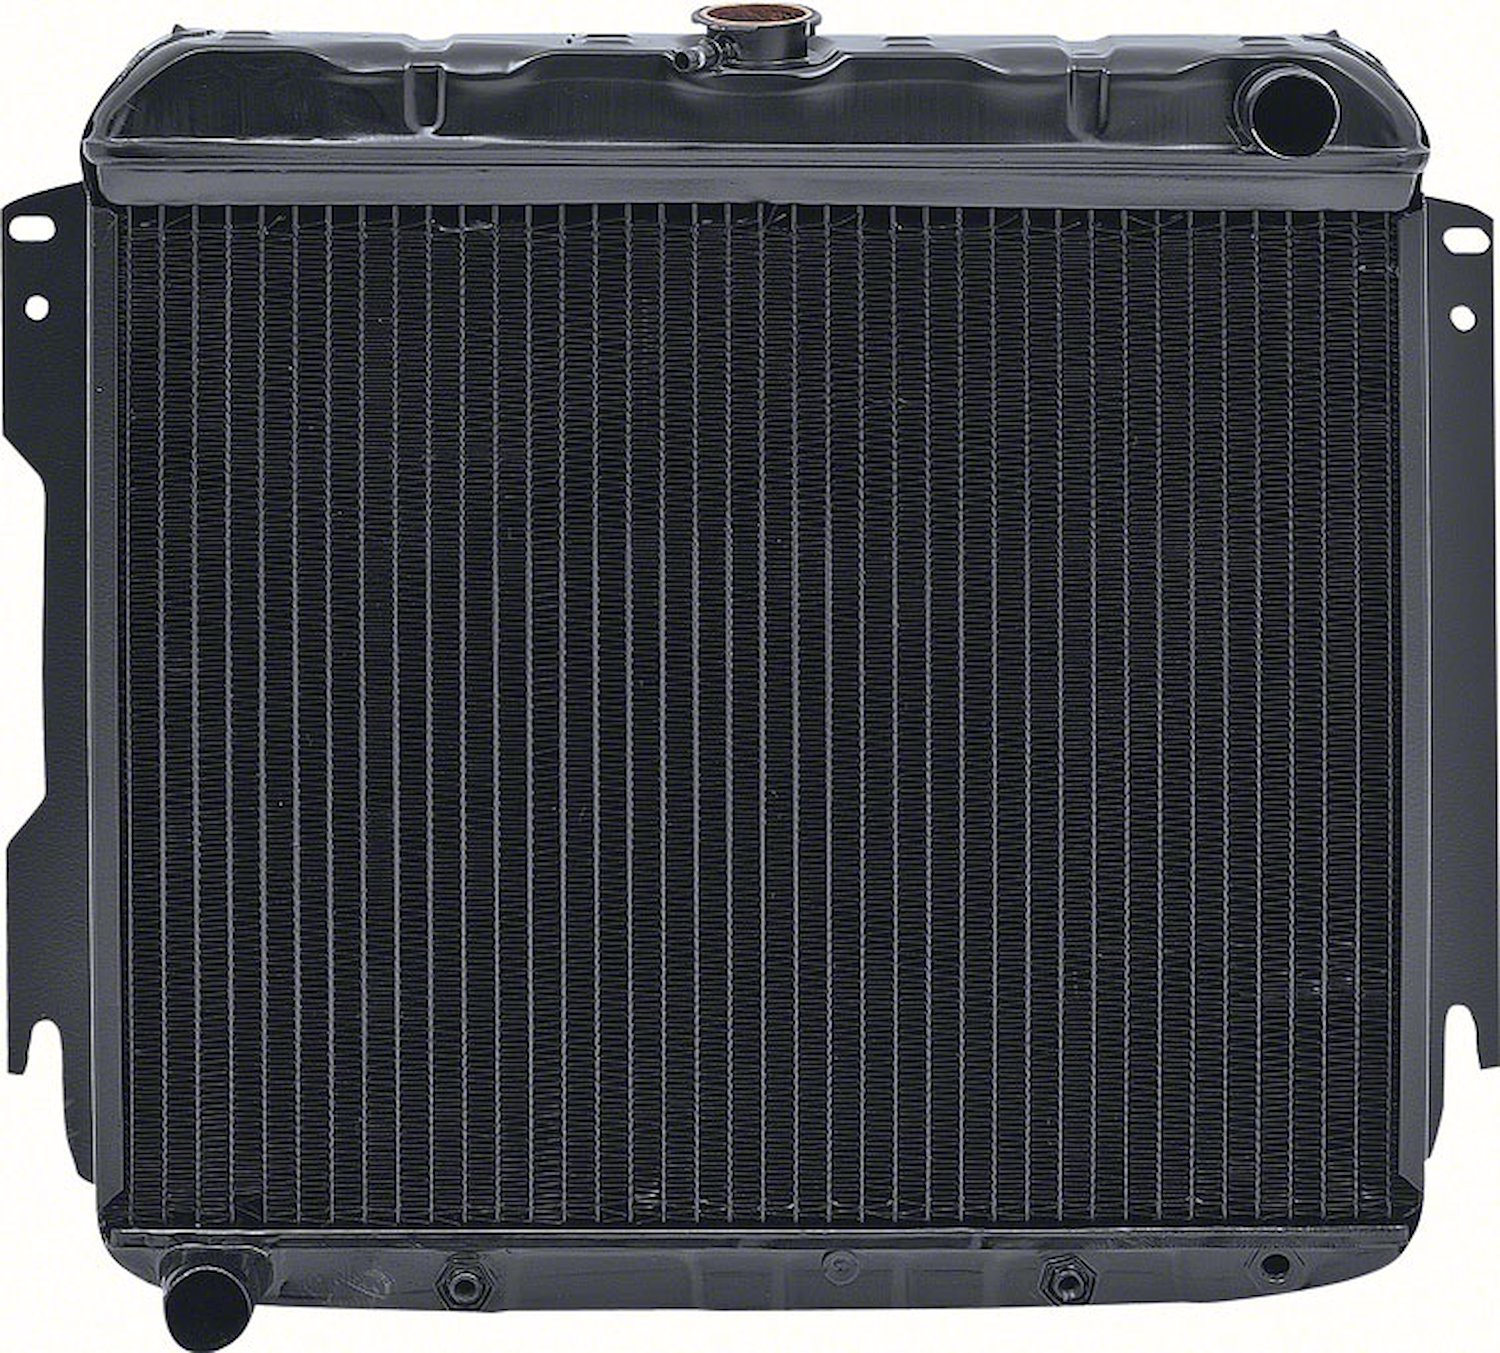 MB2376A Replacement Radiator 1963-64 Dodge B-Body 318Ci V8 Automatic Trans 4 Row